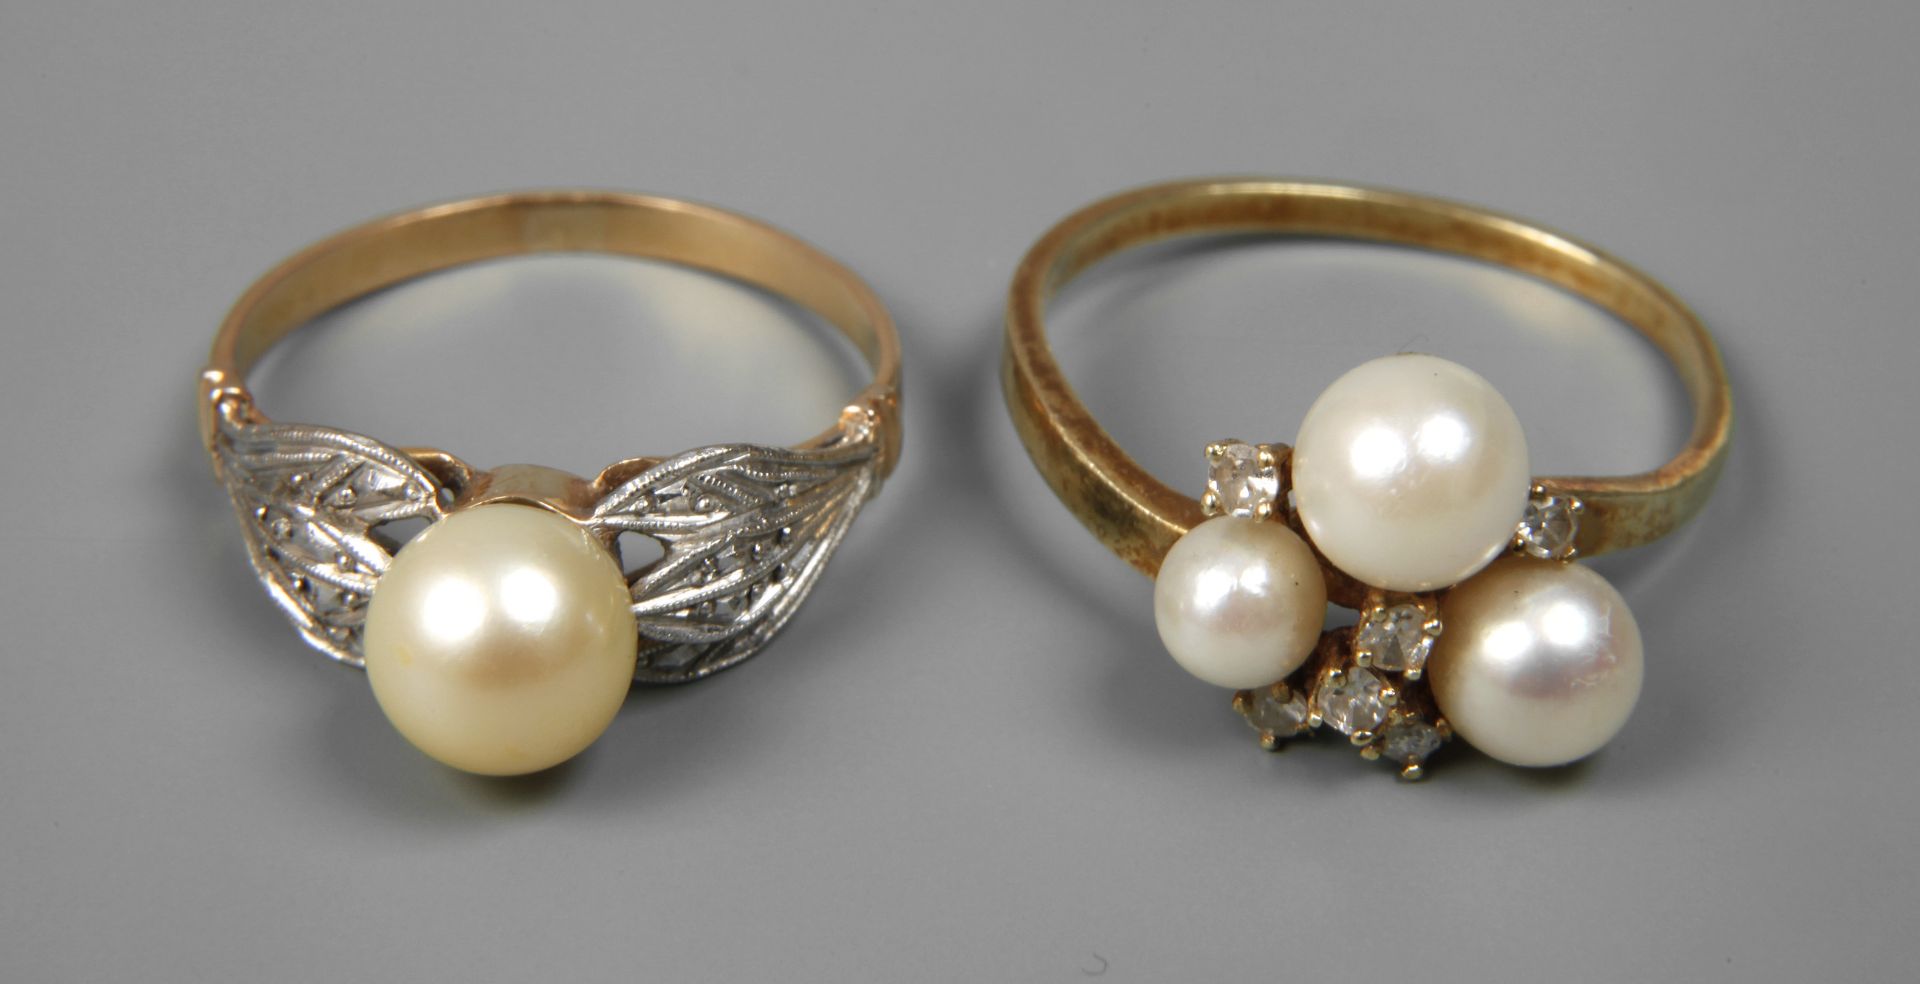 Two ladies' rings with pearls